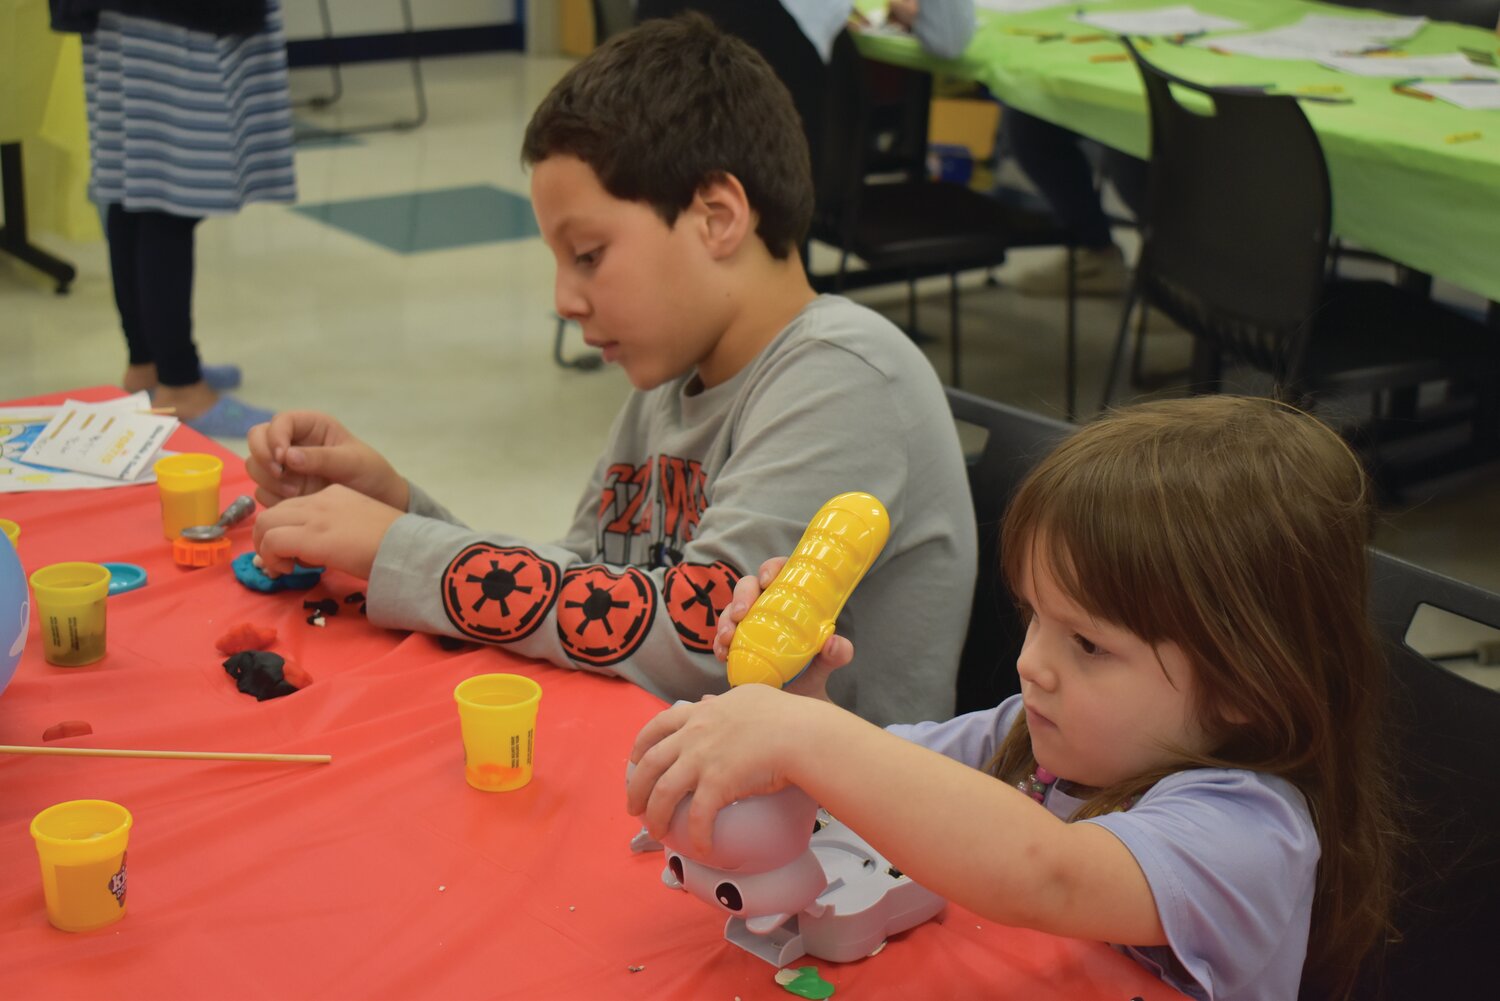 Part of the Give Kids a Smile Day is teaching children the importance of dental hygiene, Campus President Wyman Dickey said. Jaylea and Zachary used putty to create a tooth mold.